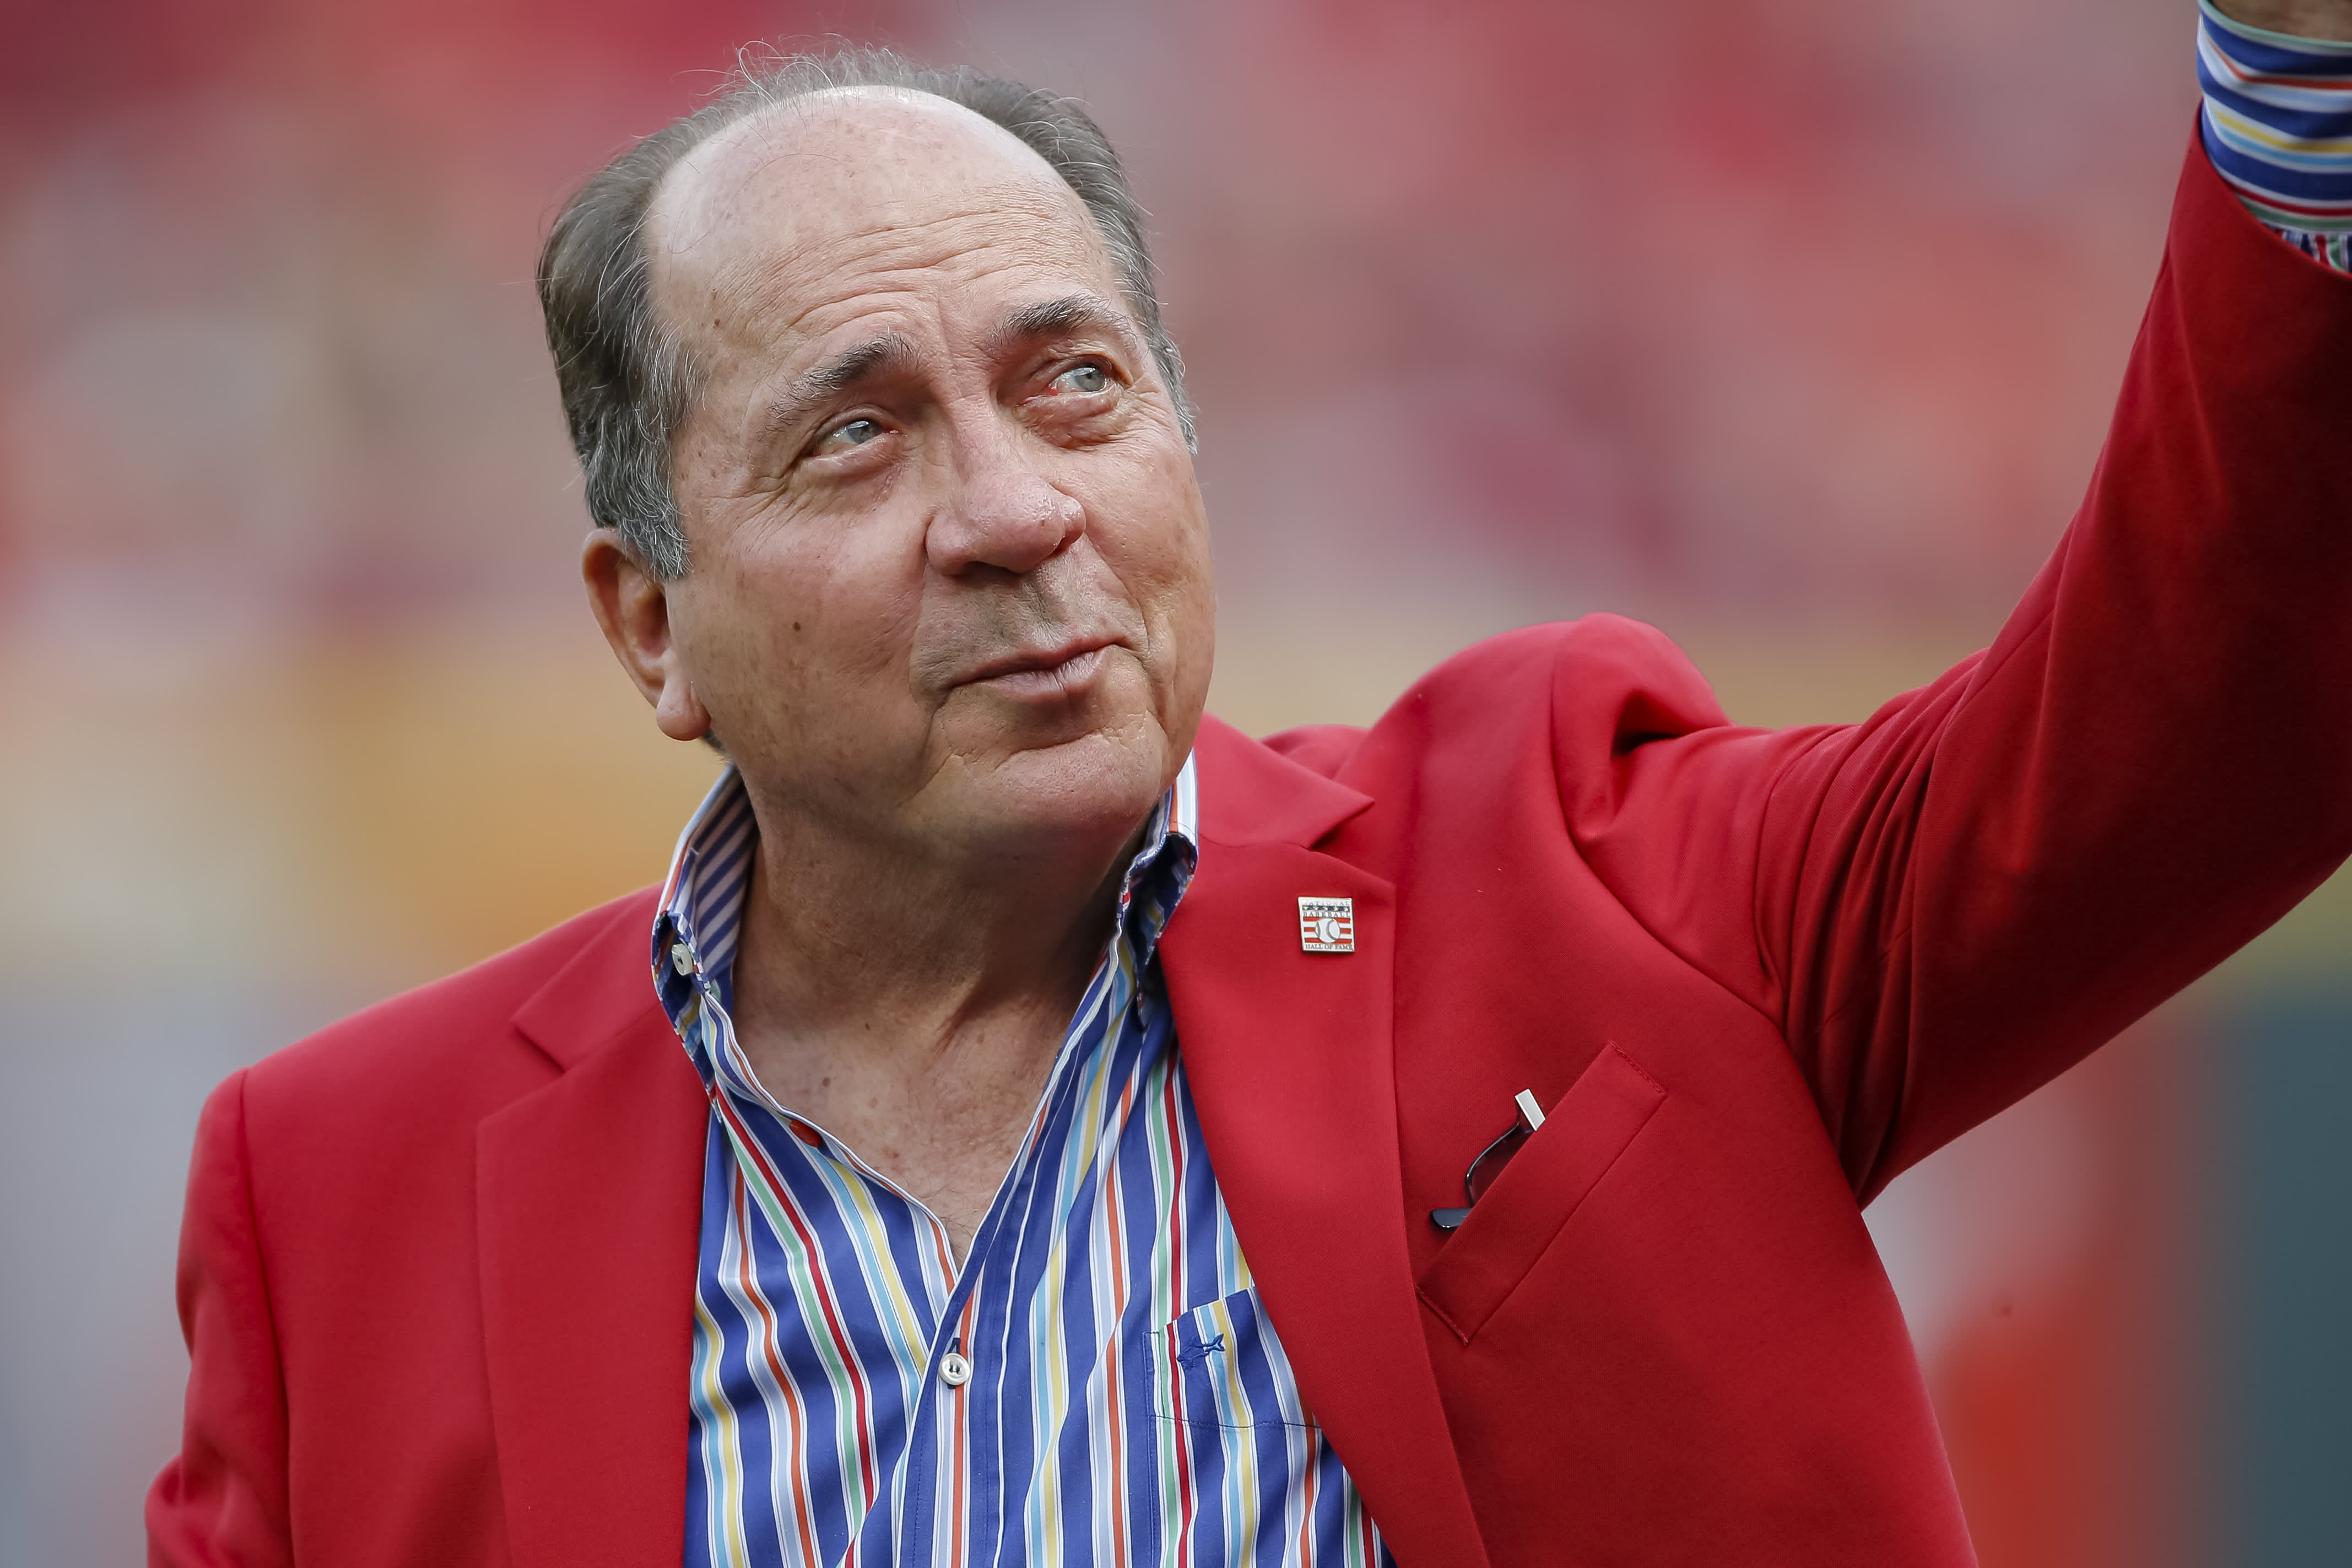 MLB Hall of Fame catcher Johnny Bench on sticky baseball controversy: 'A little pine tar never hurt'